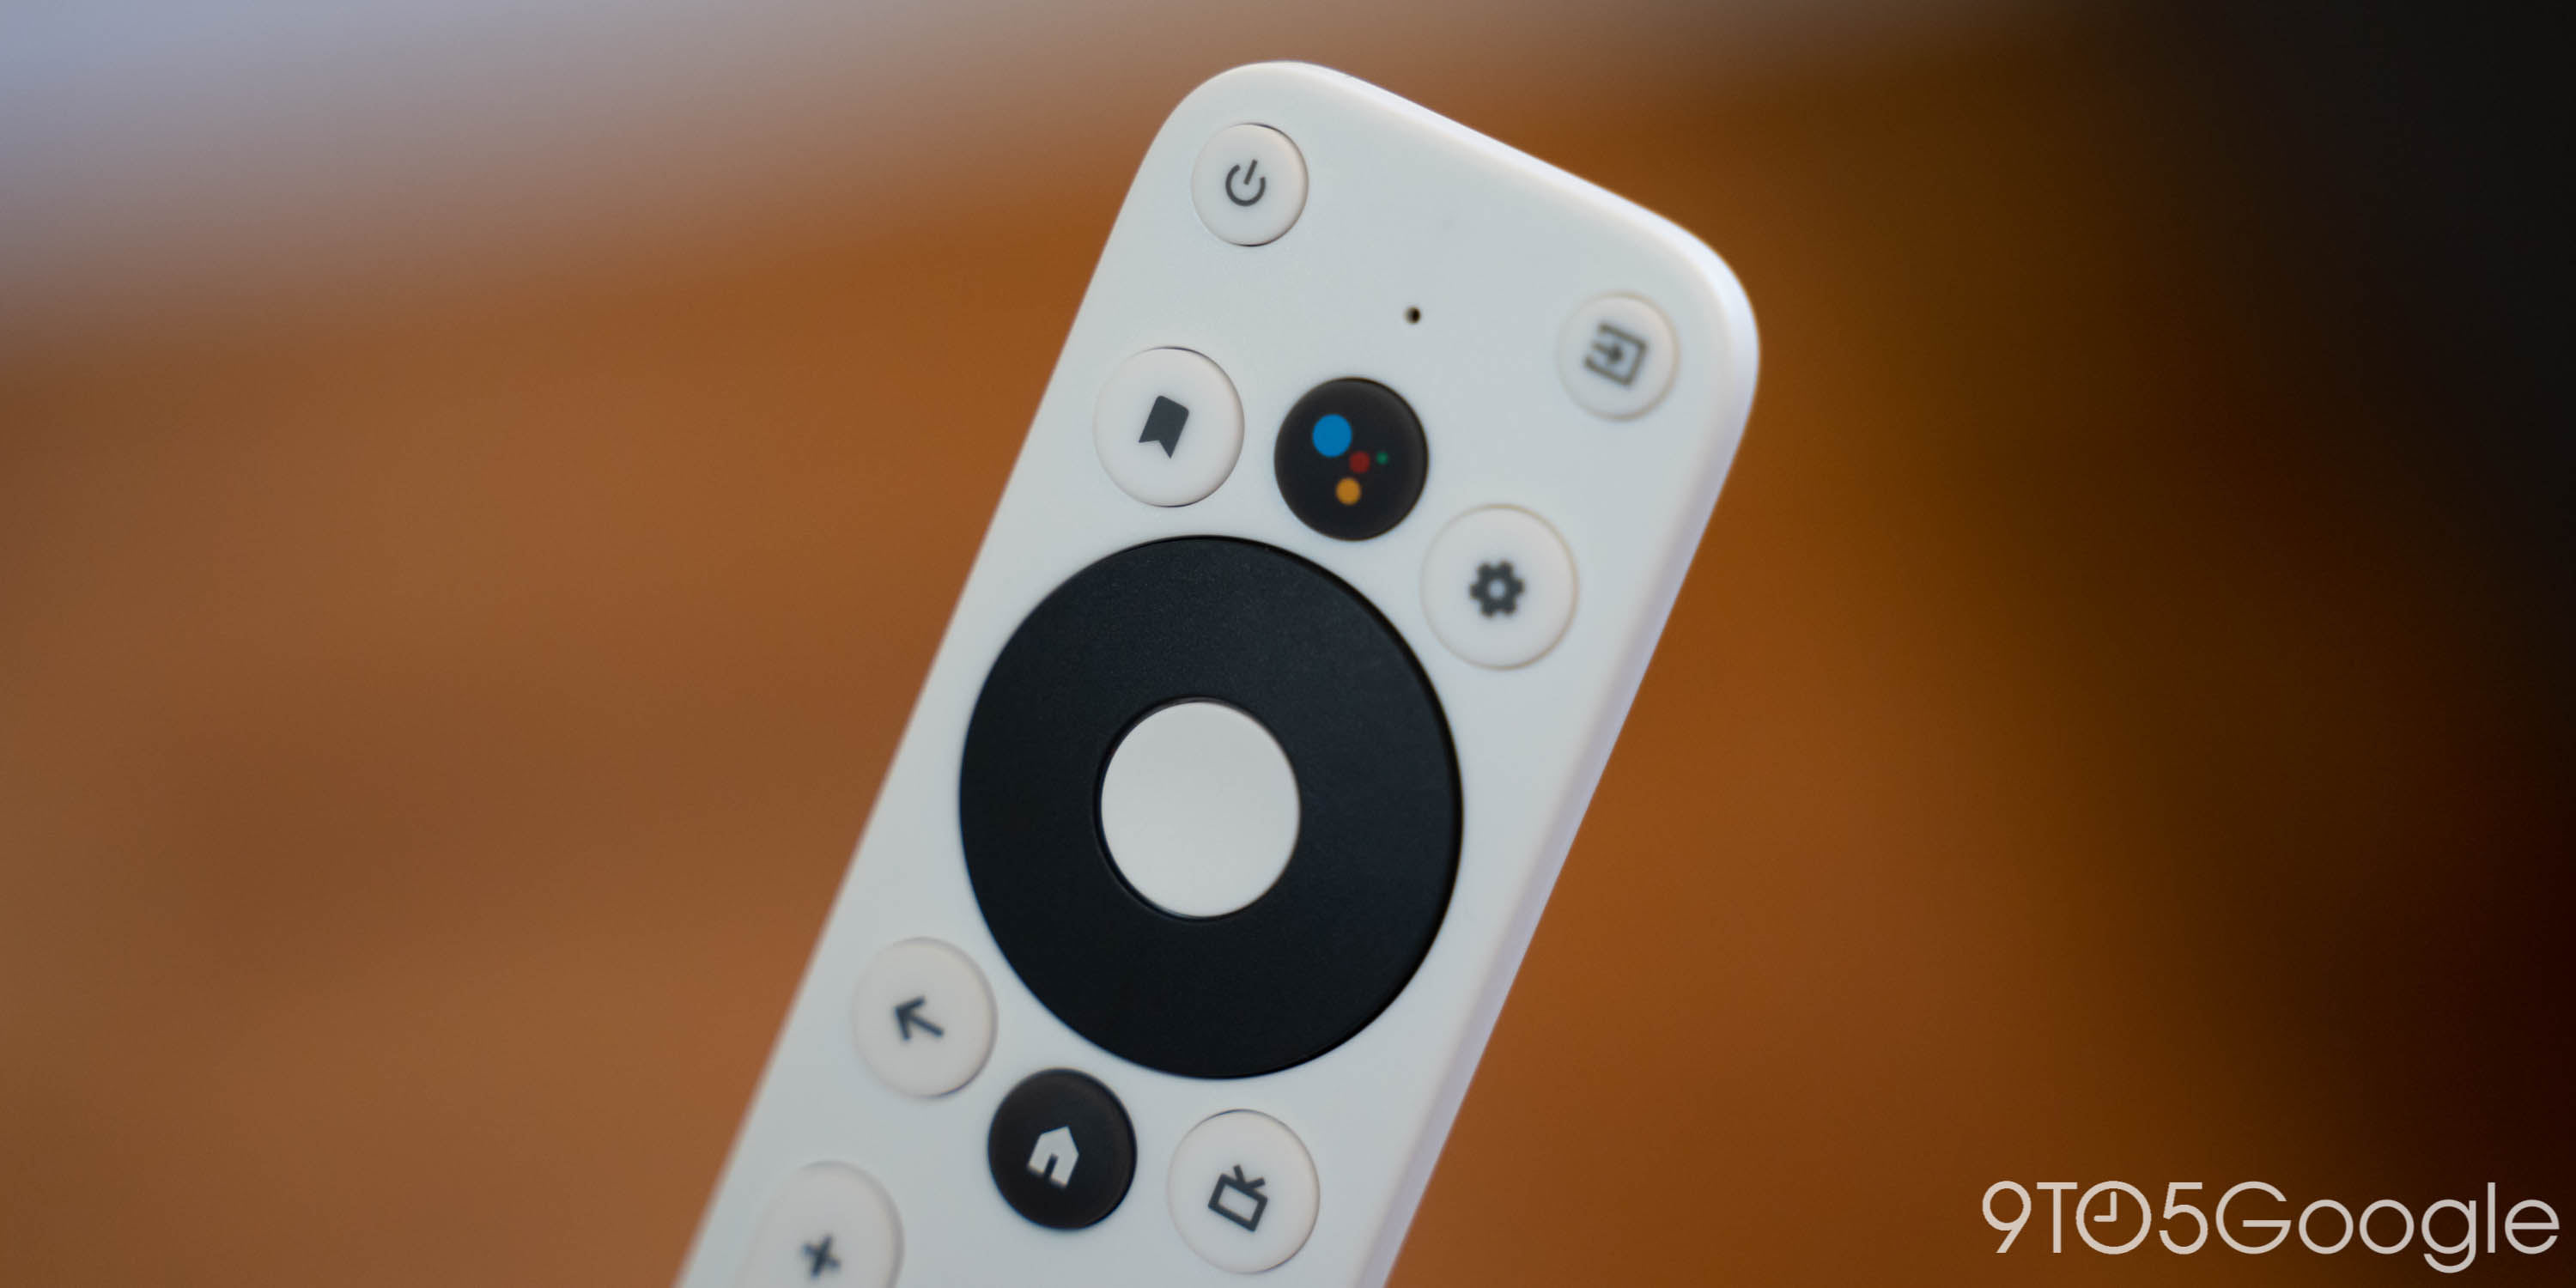 How To Buy Google'S Remote Design As A Replacement For Any Android Tv